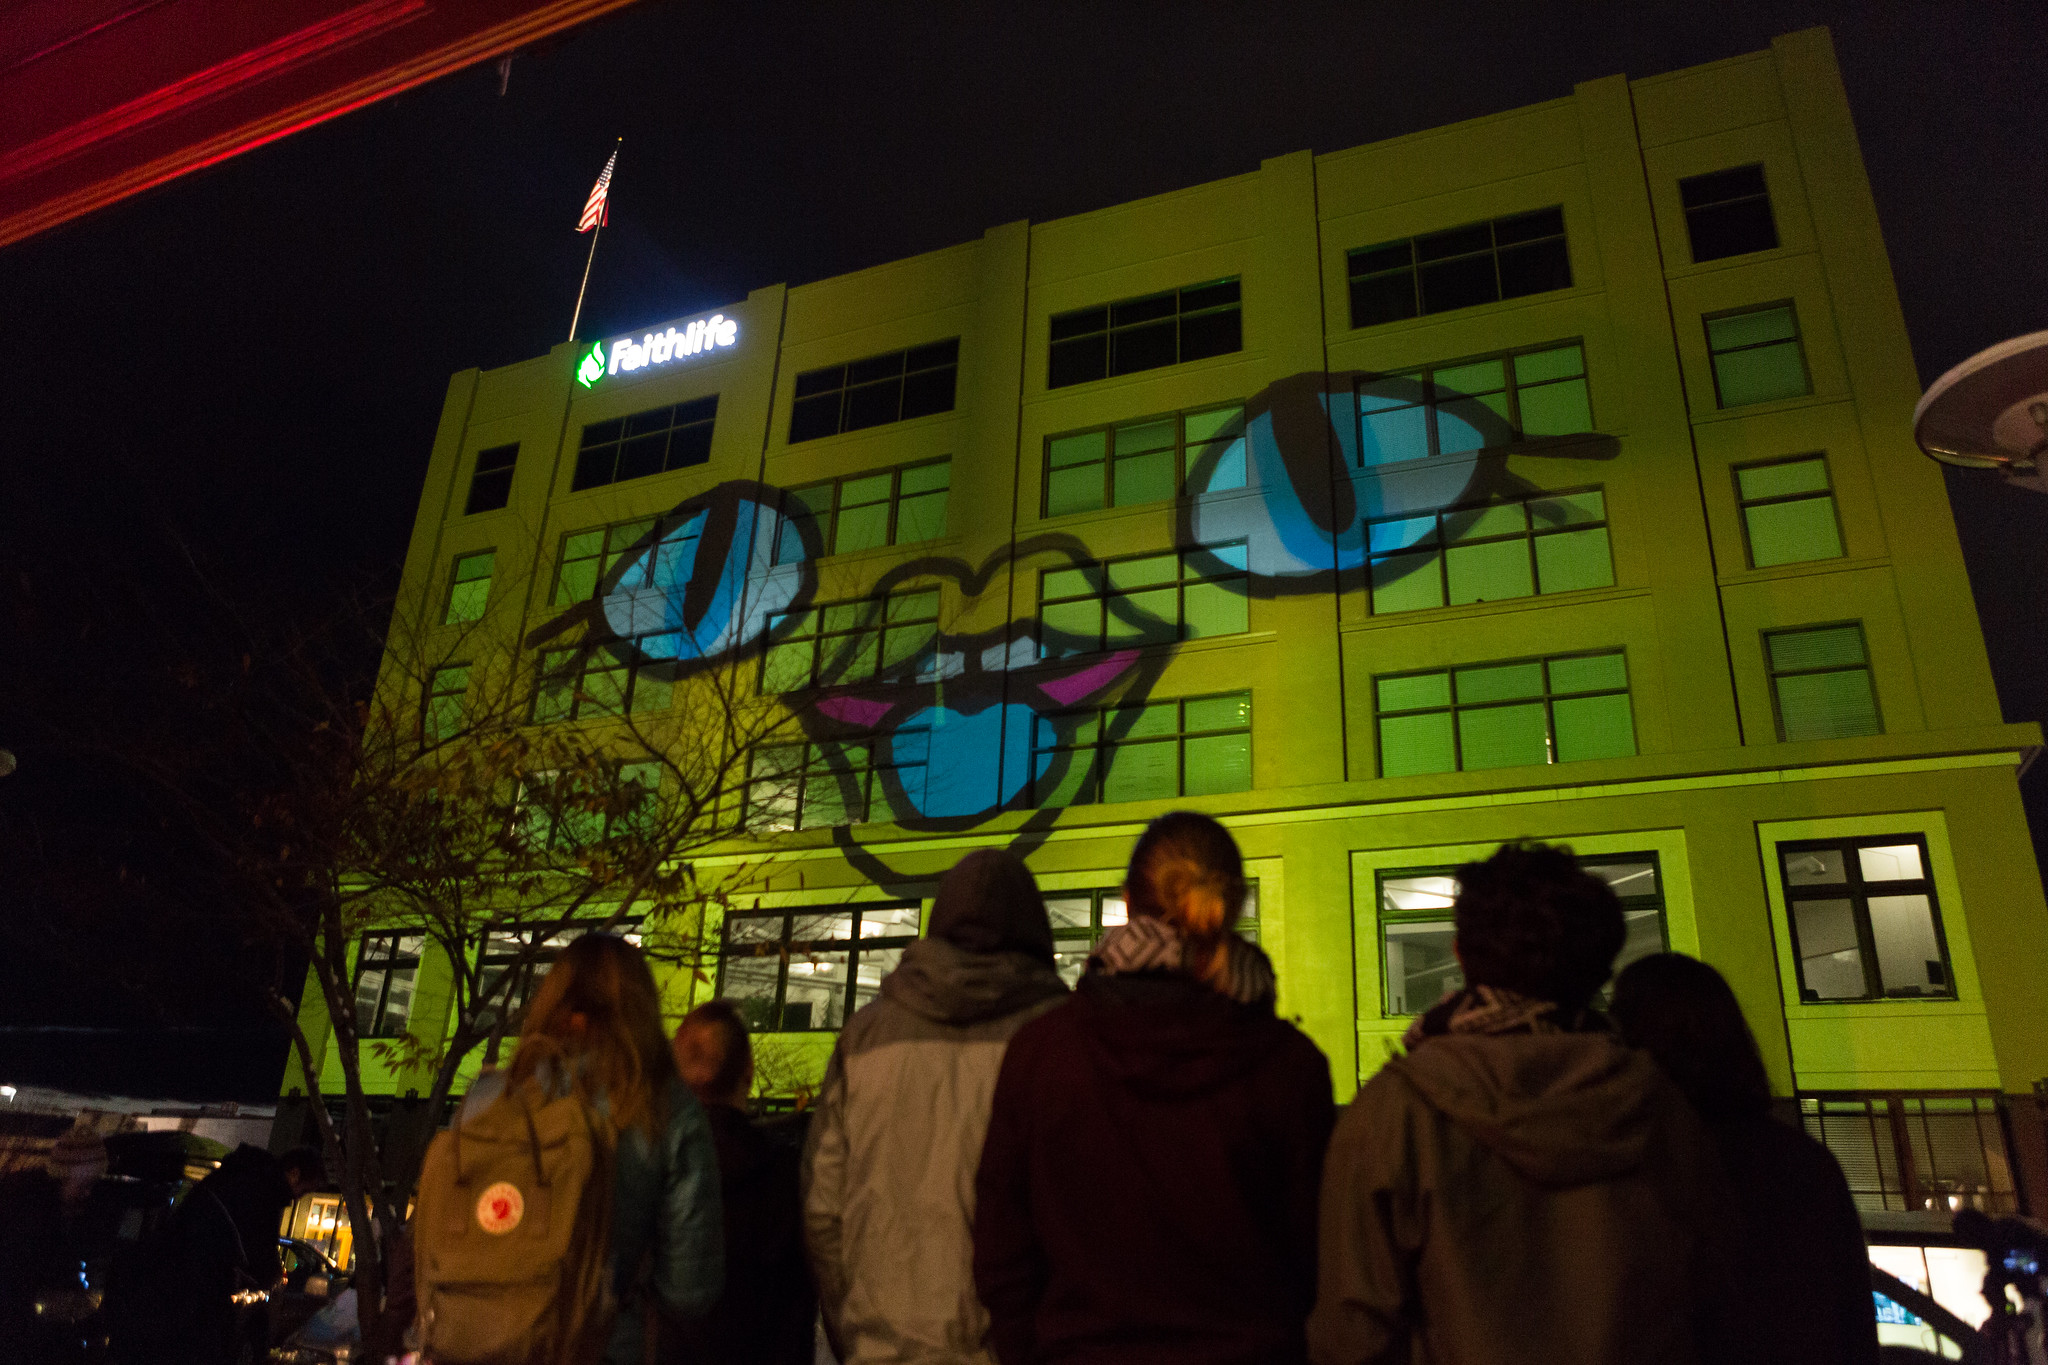 An animation is projected onto the side of the Flatiron building using a projector. The projected art makes the whole building look like a yellow cartoon face. A crowd of people watches the show.